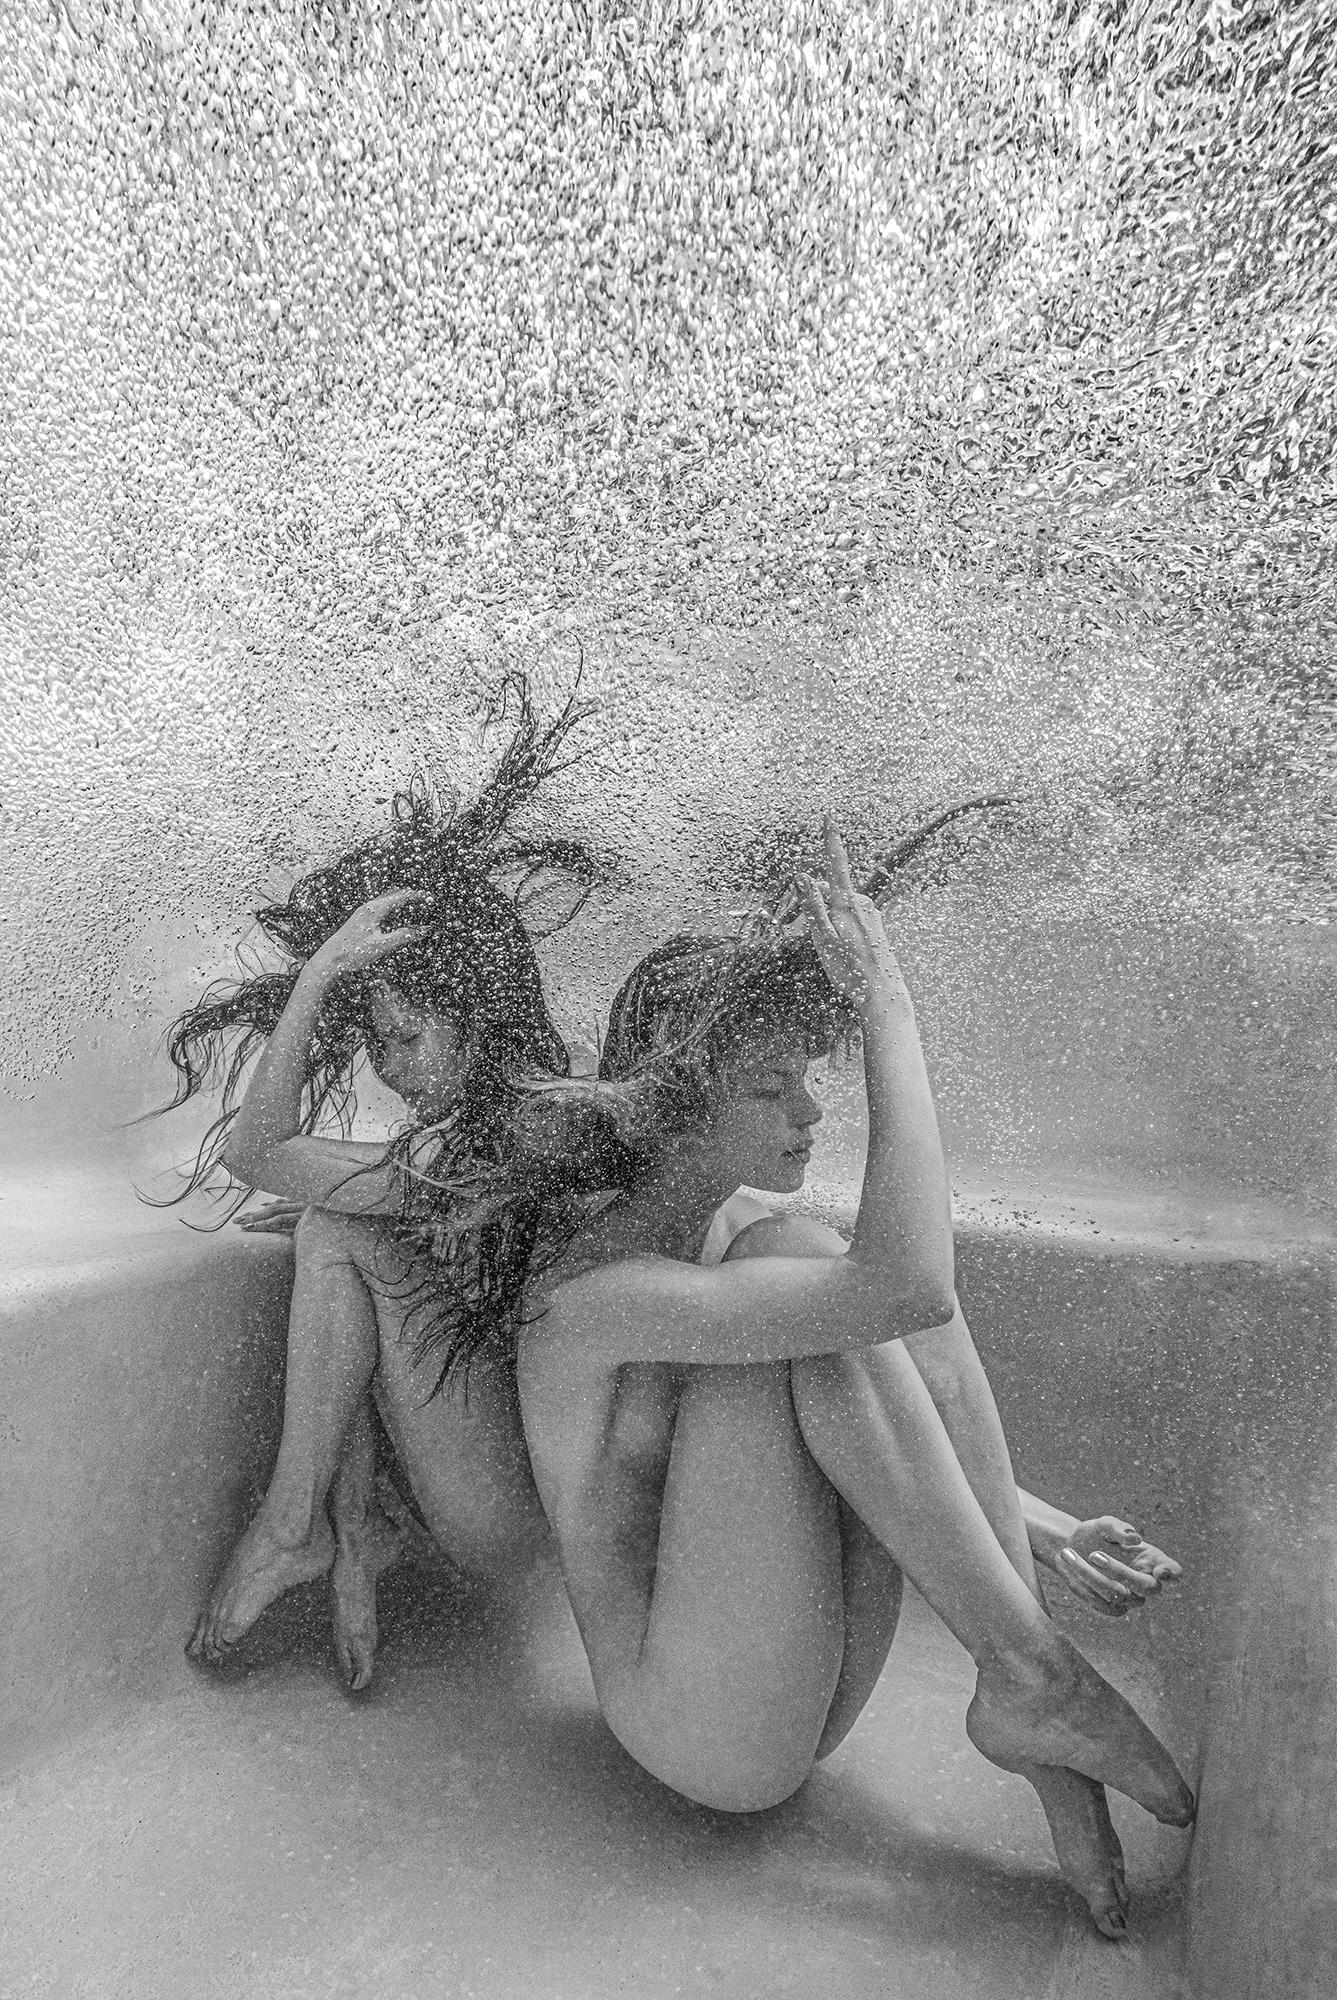 Alex Sher Nude Photograph - Friday Night - underwater black & white photograph - print on aluminum 36" x 24"